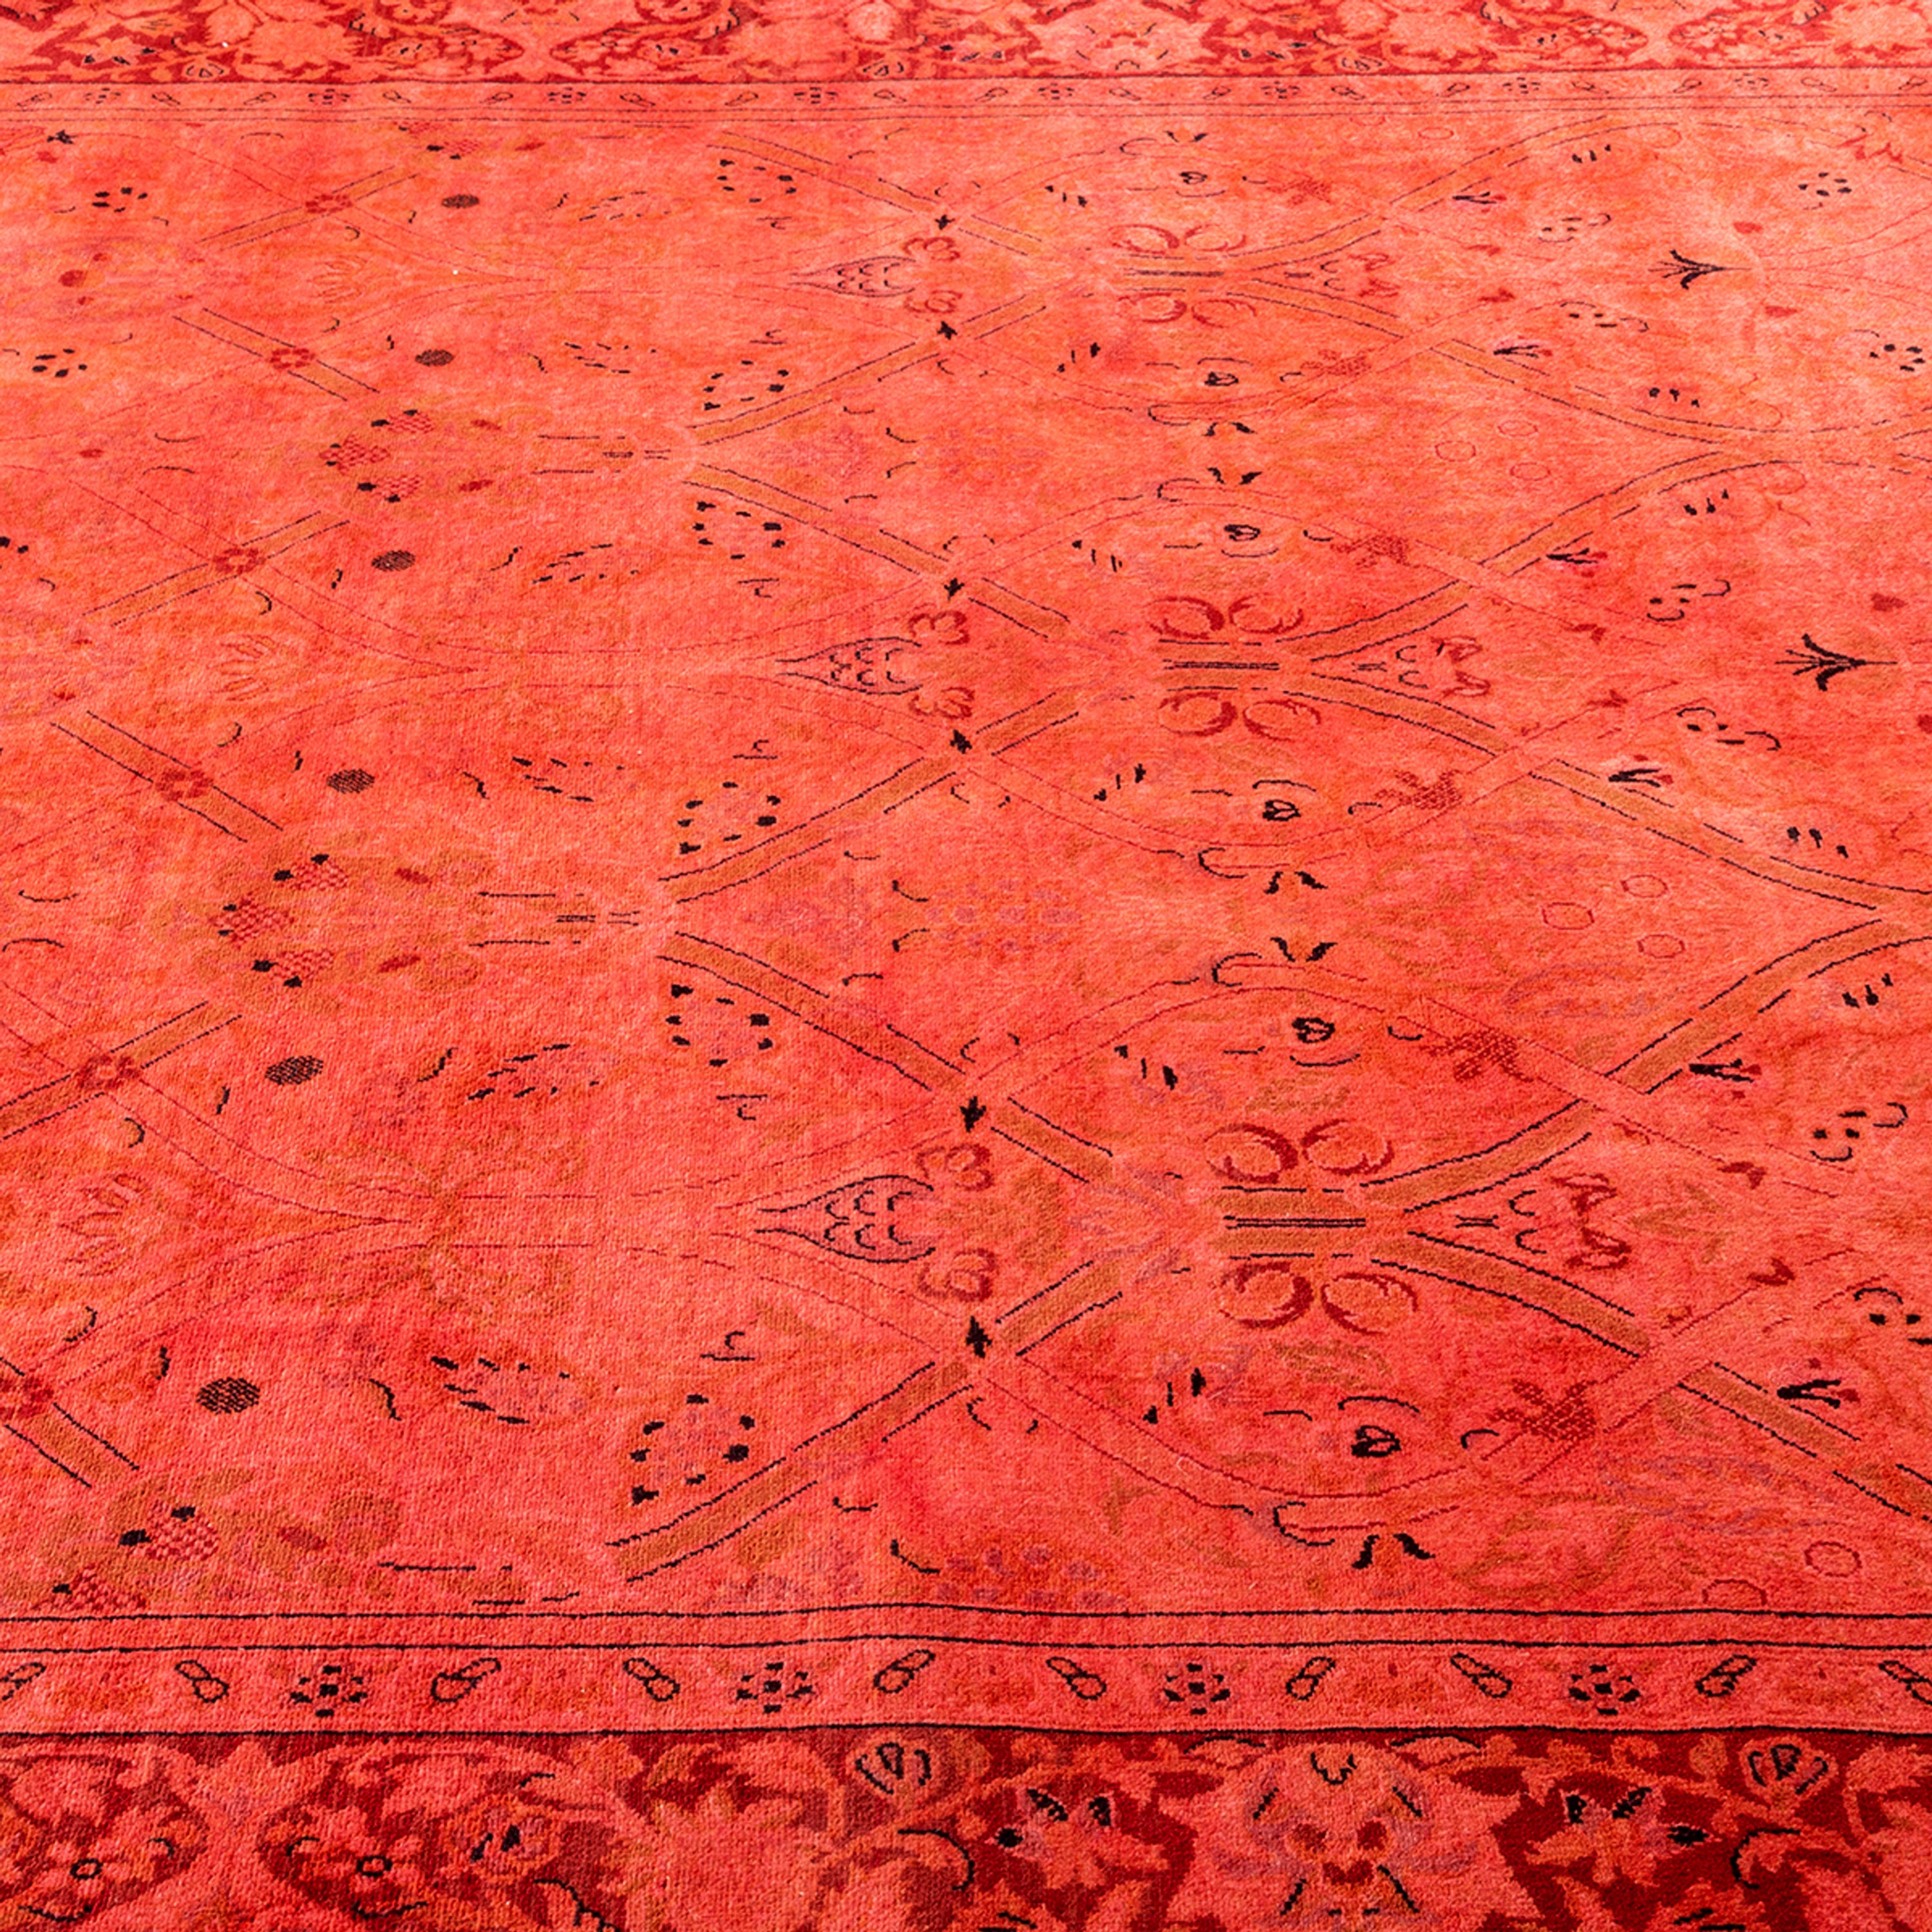 Overdyed Red Wool Rug - 6'1" x 9' Default Title